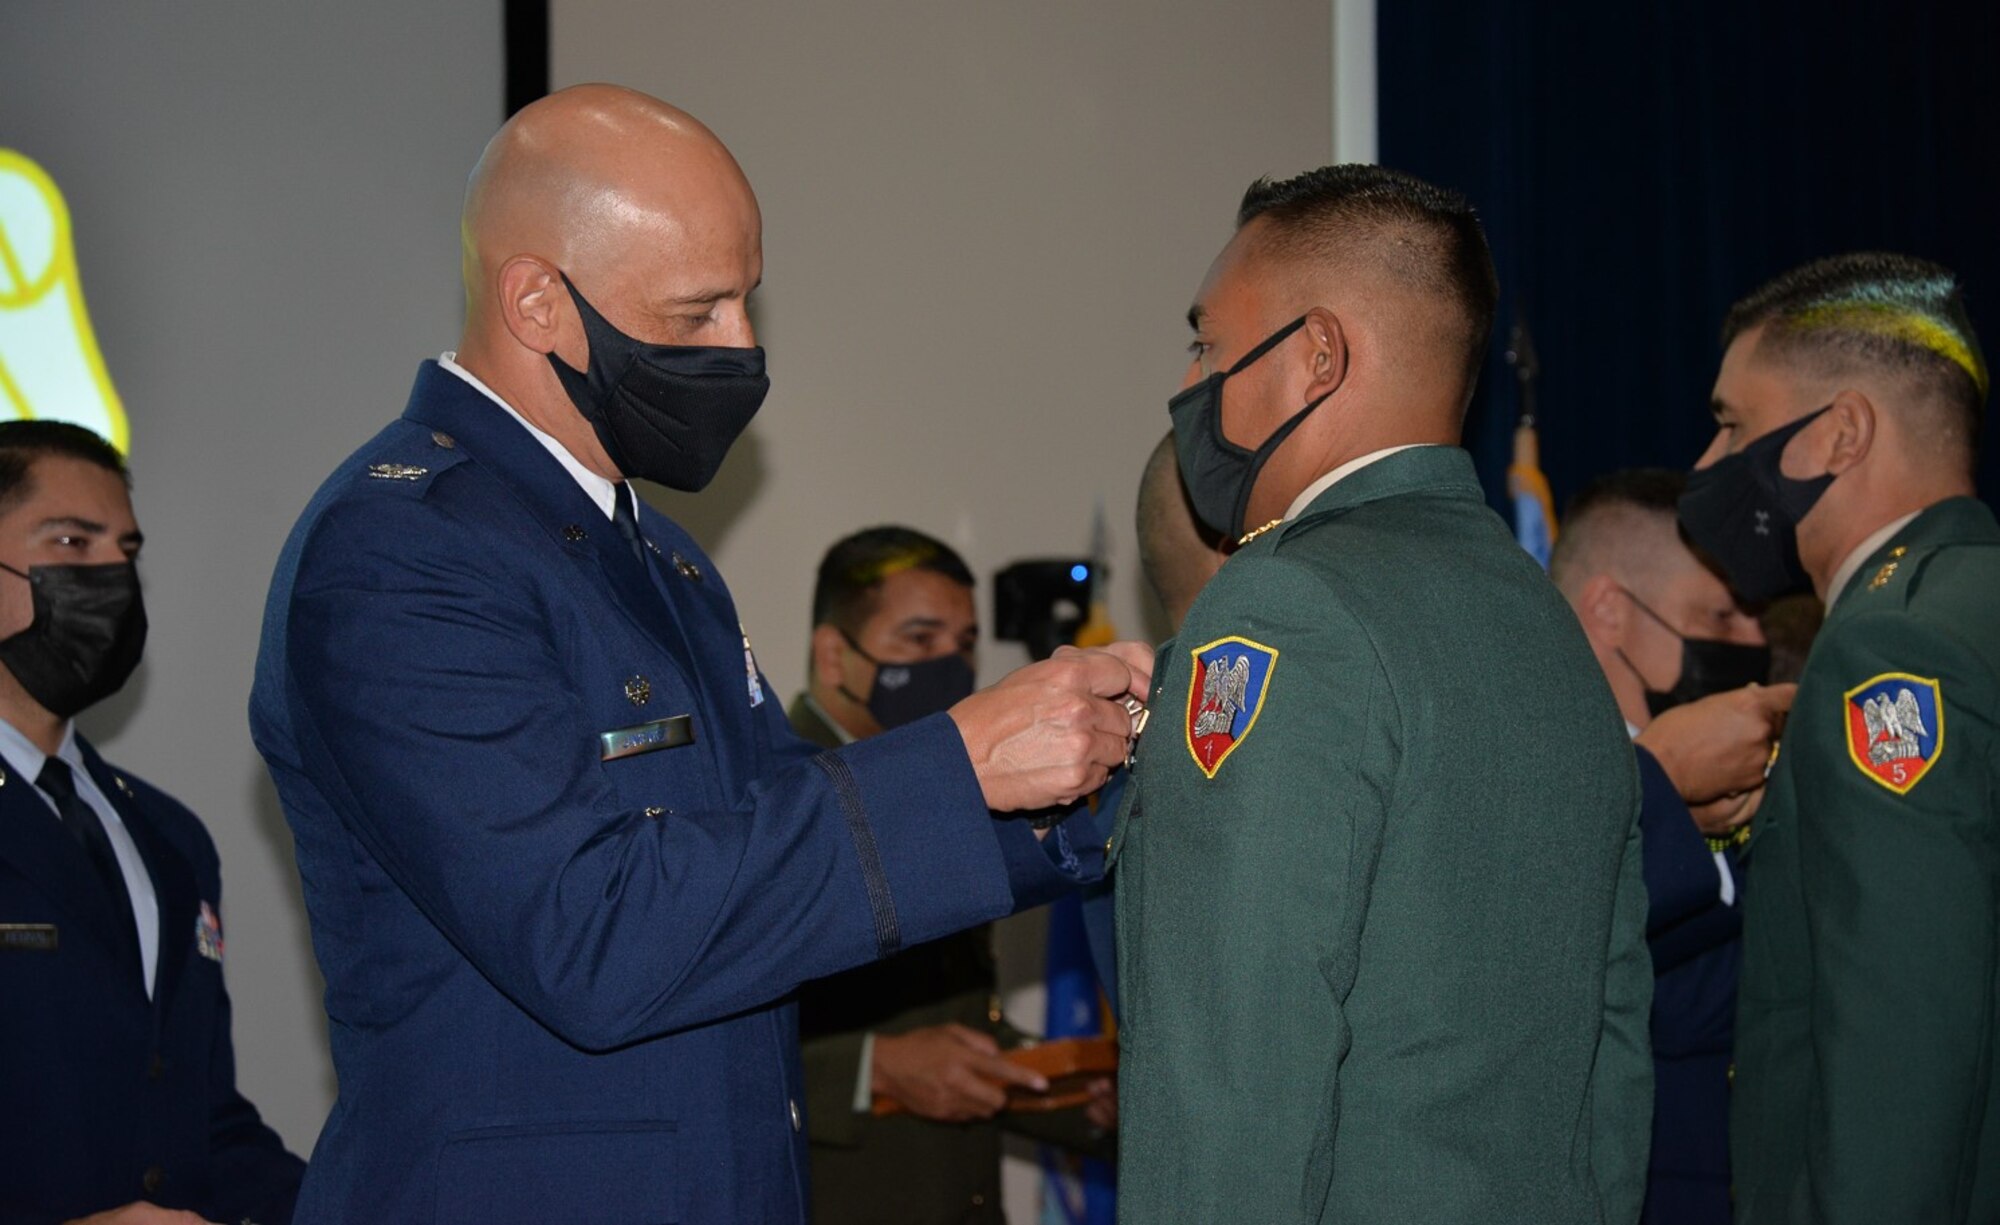 Col. Jose Jimenez, Inter-American Air Forces Academy commandant, pins the academy’s wings on a member of Class 2021-B at the graduation ceremony Aug. 10, 2021, at Joint Base San Antonio-Lackland, Texas. The class of 134 included 121 International Military Students from nine countries and 13 U.S. military members.